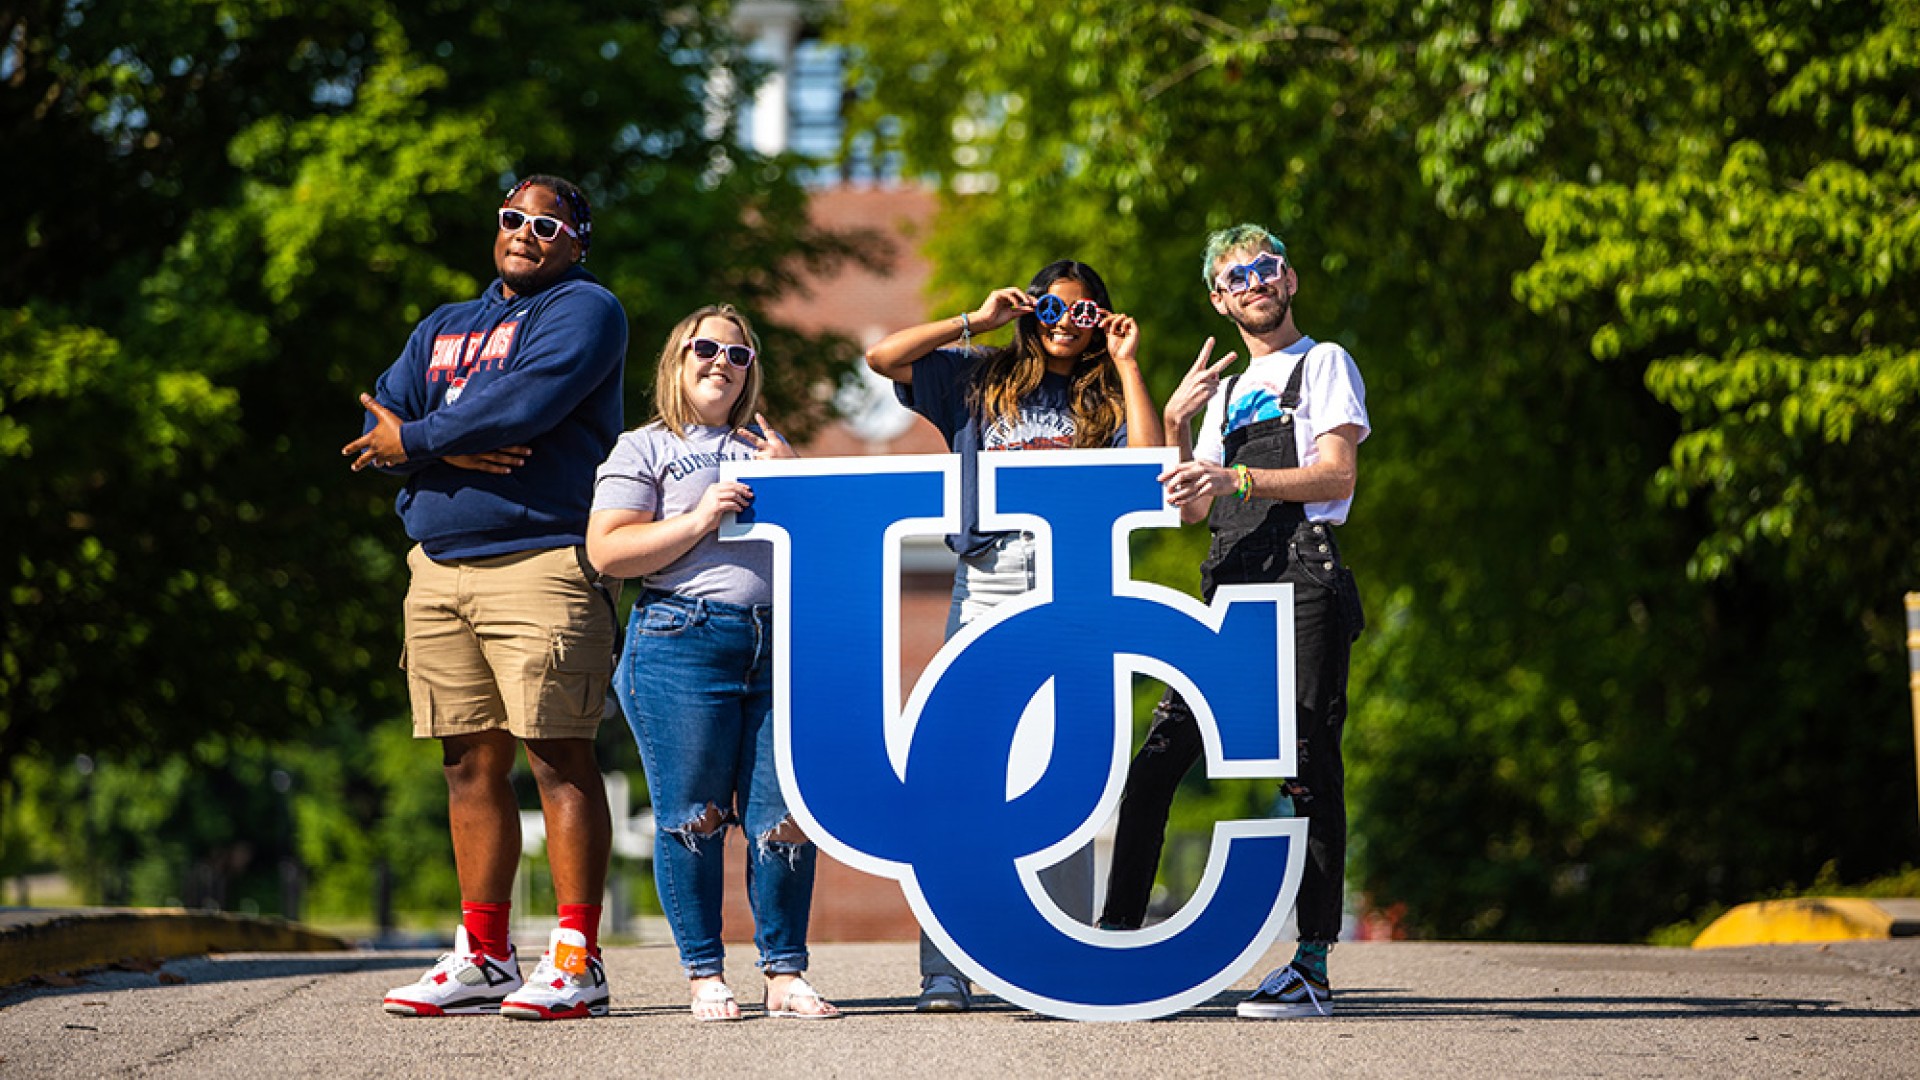 Students pose with sunglasses and UC sign